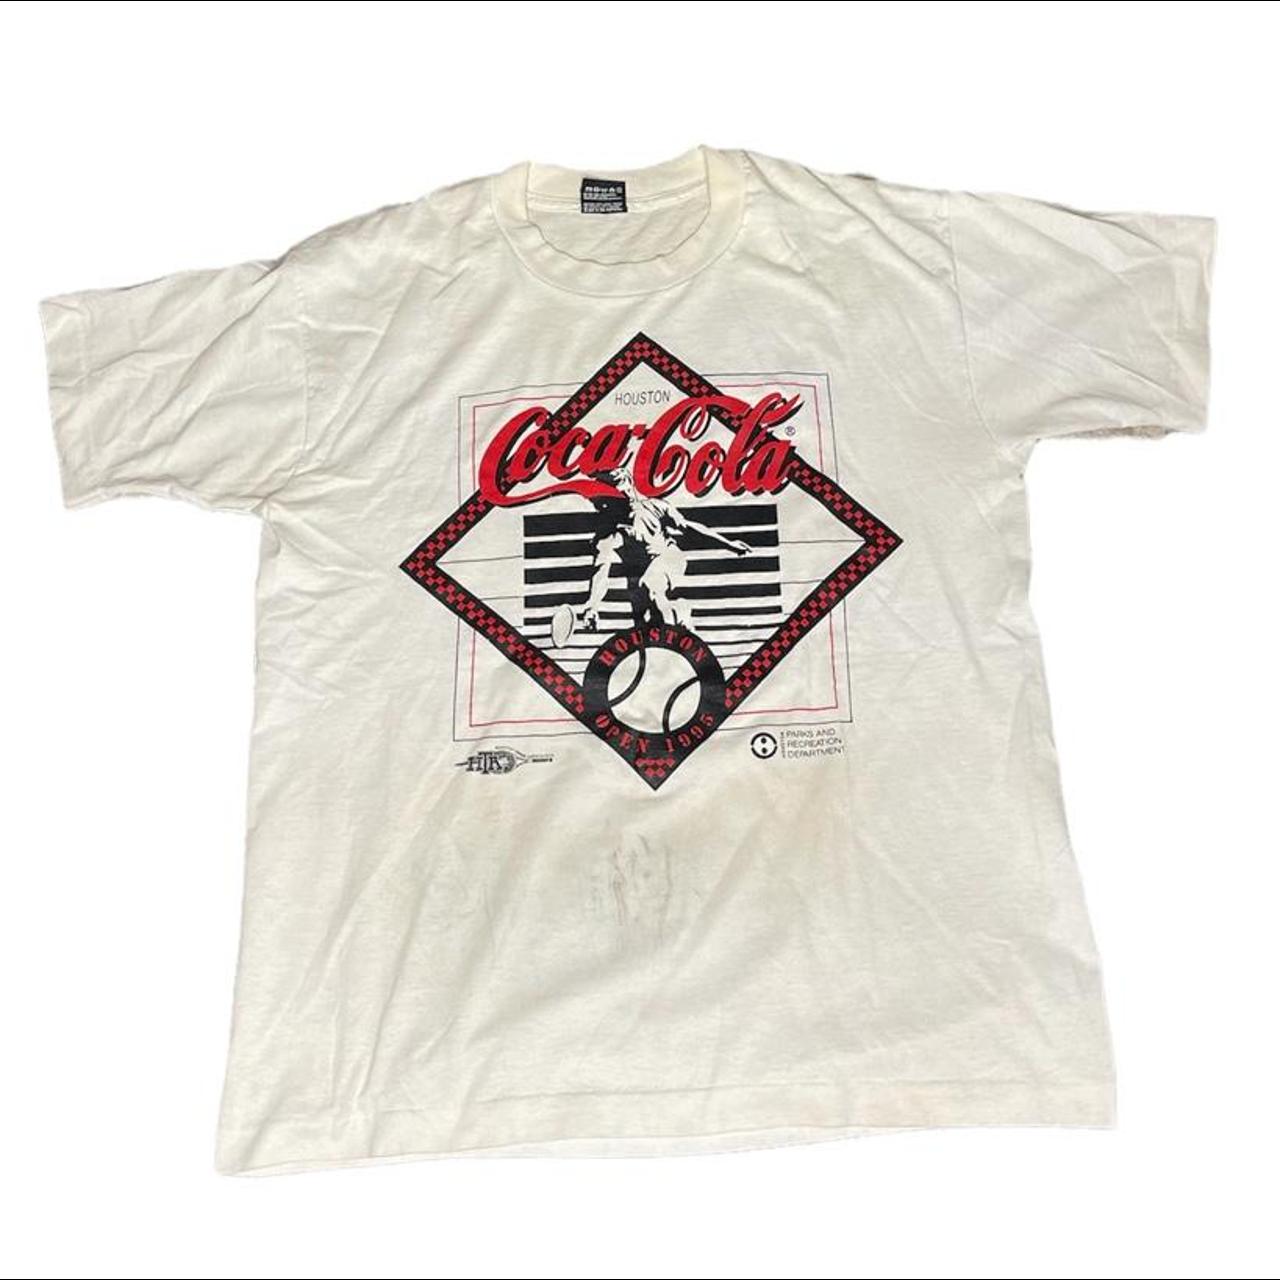 Coca-Cola Men's White and Red T-shirt